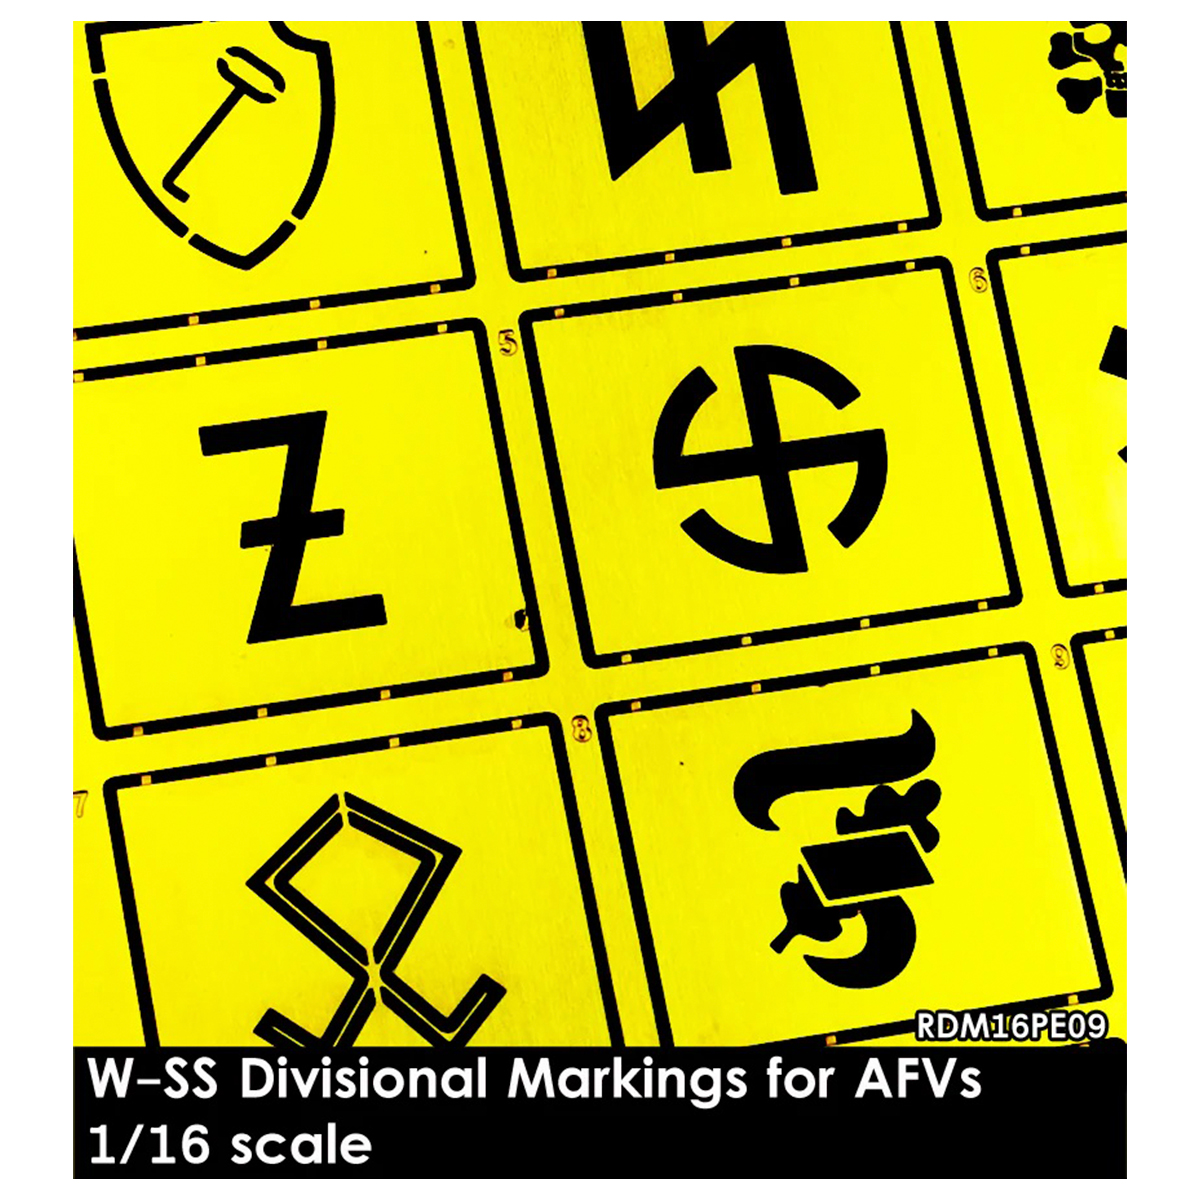 W-SS Divisional Markings for AFVs 1/16